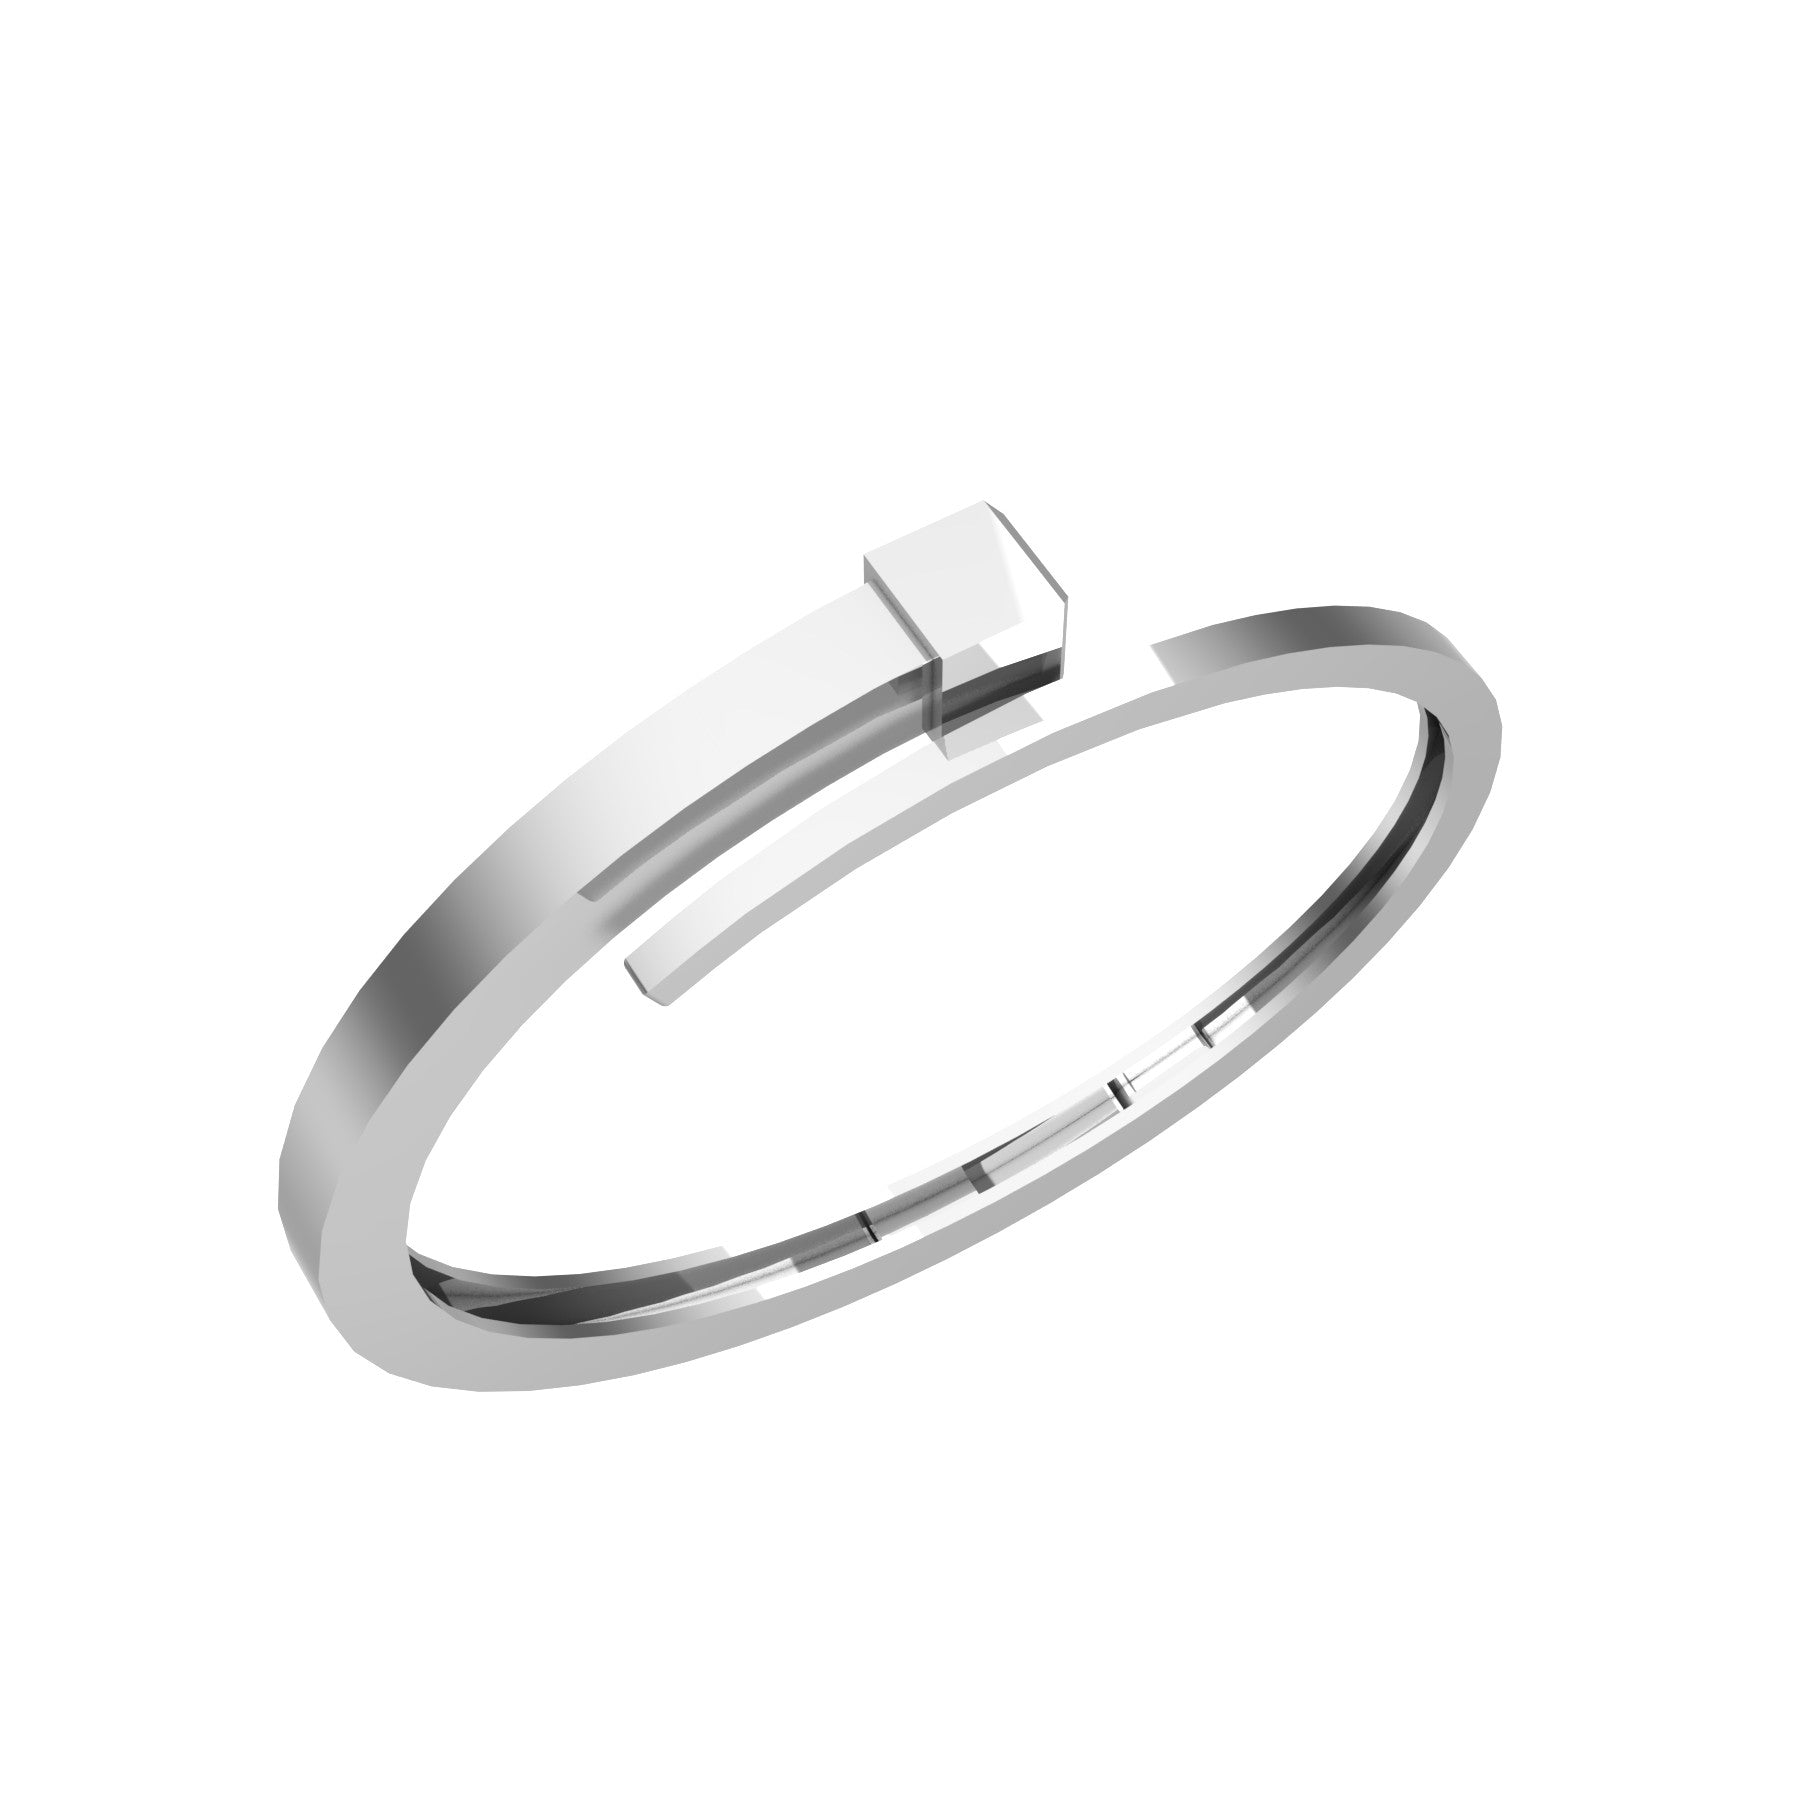 lucky nail bracelet, 18 K white gold, weight about 33,1 to 52,3 g (1.17 to 1.84  oz), width 8 mm max